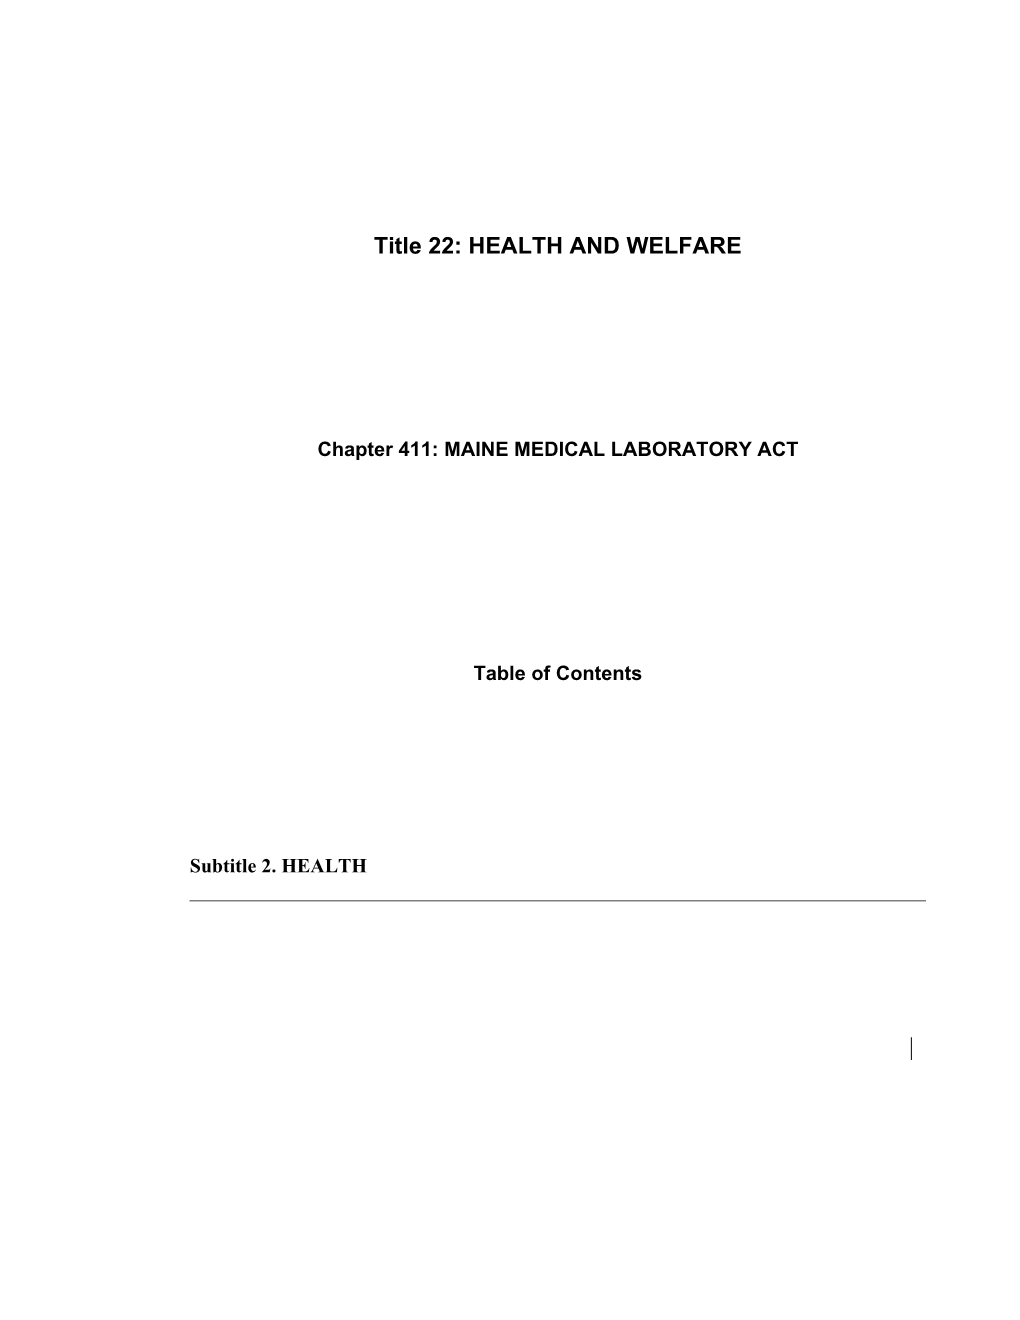 MRS Title 22, Chapter411: MAINE MEDICAL LABORATORY ACT